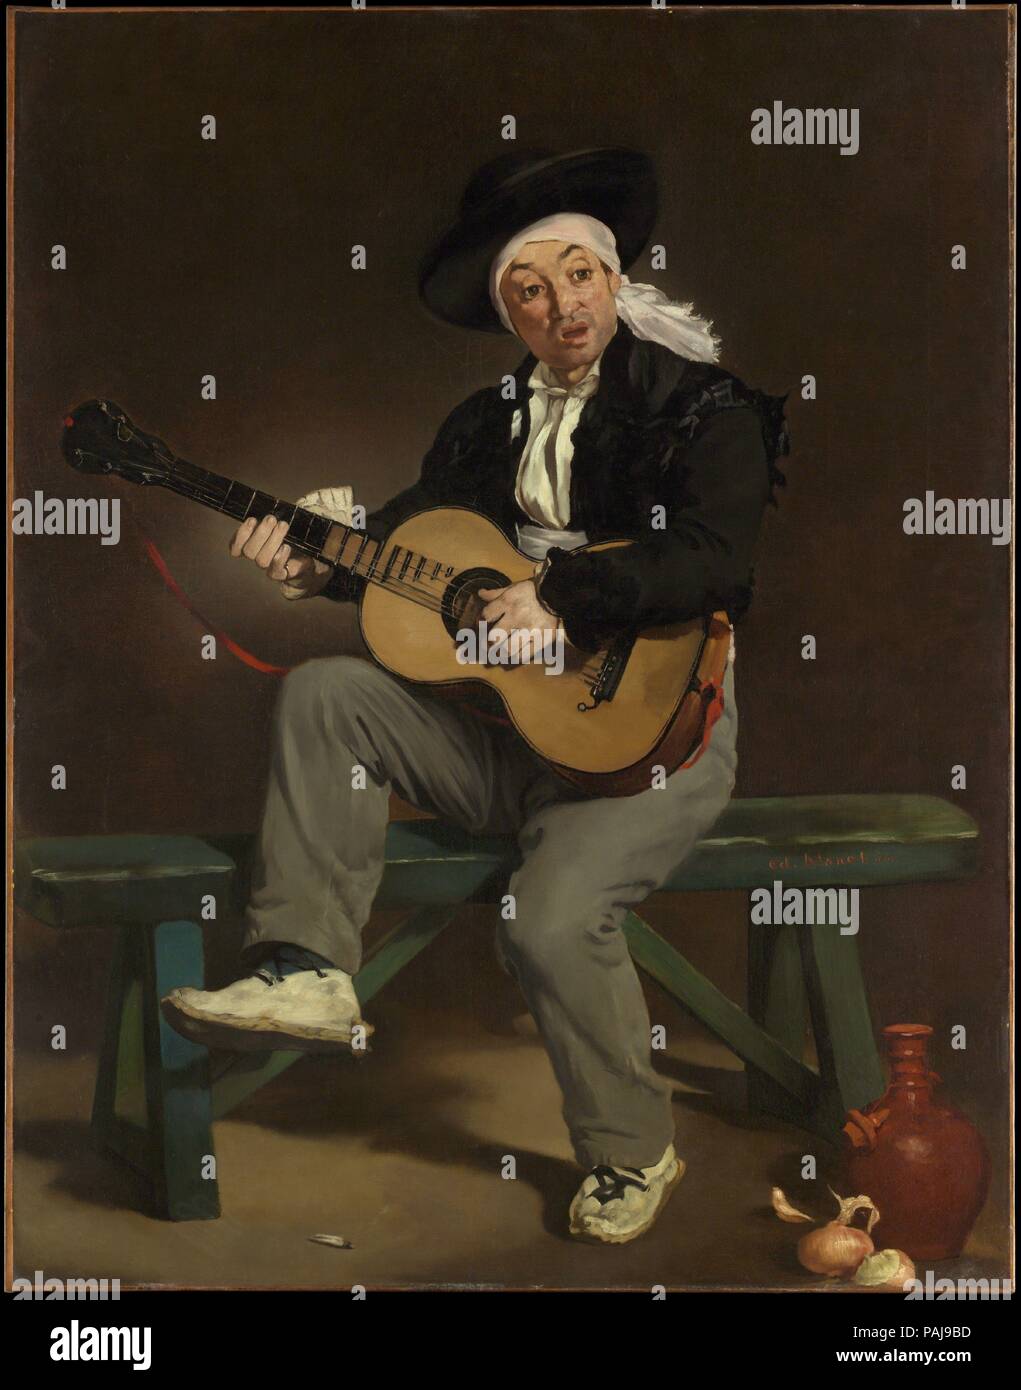 The Spanish Singer. Artist: Édouard Manet (French, Paris 1832-1883 Paris). Dimensions: 58 x 45 in. (147.3 x 114.3 cm). Date: 1860.  This painting, which reflects the Parisian vogue for Spanish art and culture during the Second Empire, won Manet his first popular and critical success in his debut at the Salon of 1861. Though the picture was admired for its realistic detail, Manet did not disguise the fact that it was composed in a studio using a model and props. The left-handed singer holds a guitar strung for a right-handed player, and his fingering suggests that he was unfamiliar with the ins Stock Photo